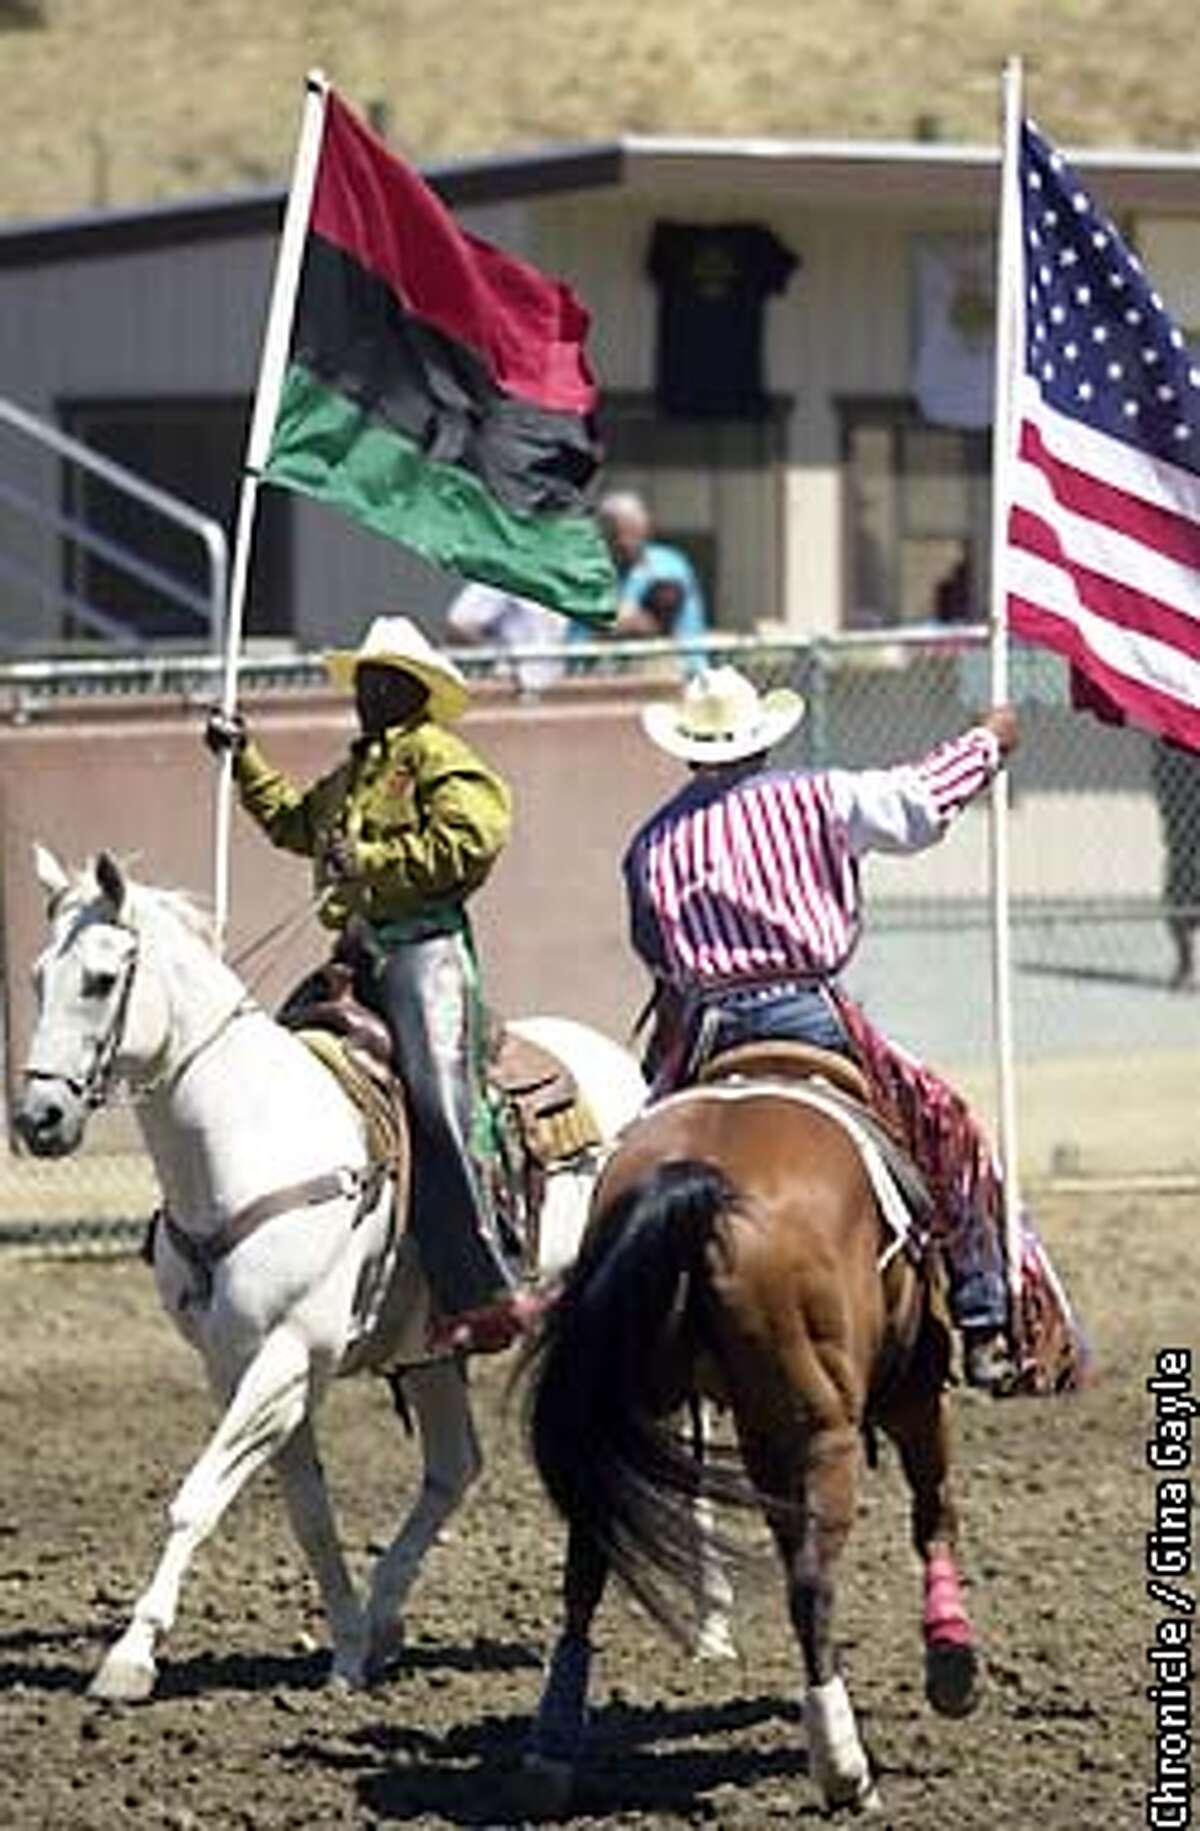 During the Grand Entry of the Bill Pickett Invitational Rodeo, the African flag and the American flag were brought into the stadium. This year the California State Fair has chosen to eliminate the Black rodeo and replace it with a multiculteral rodoe which has caused controversy. Photo by Gina Gayle/The SF Chronicle.